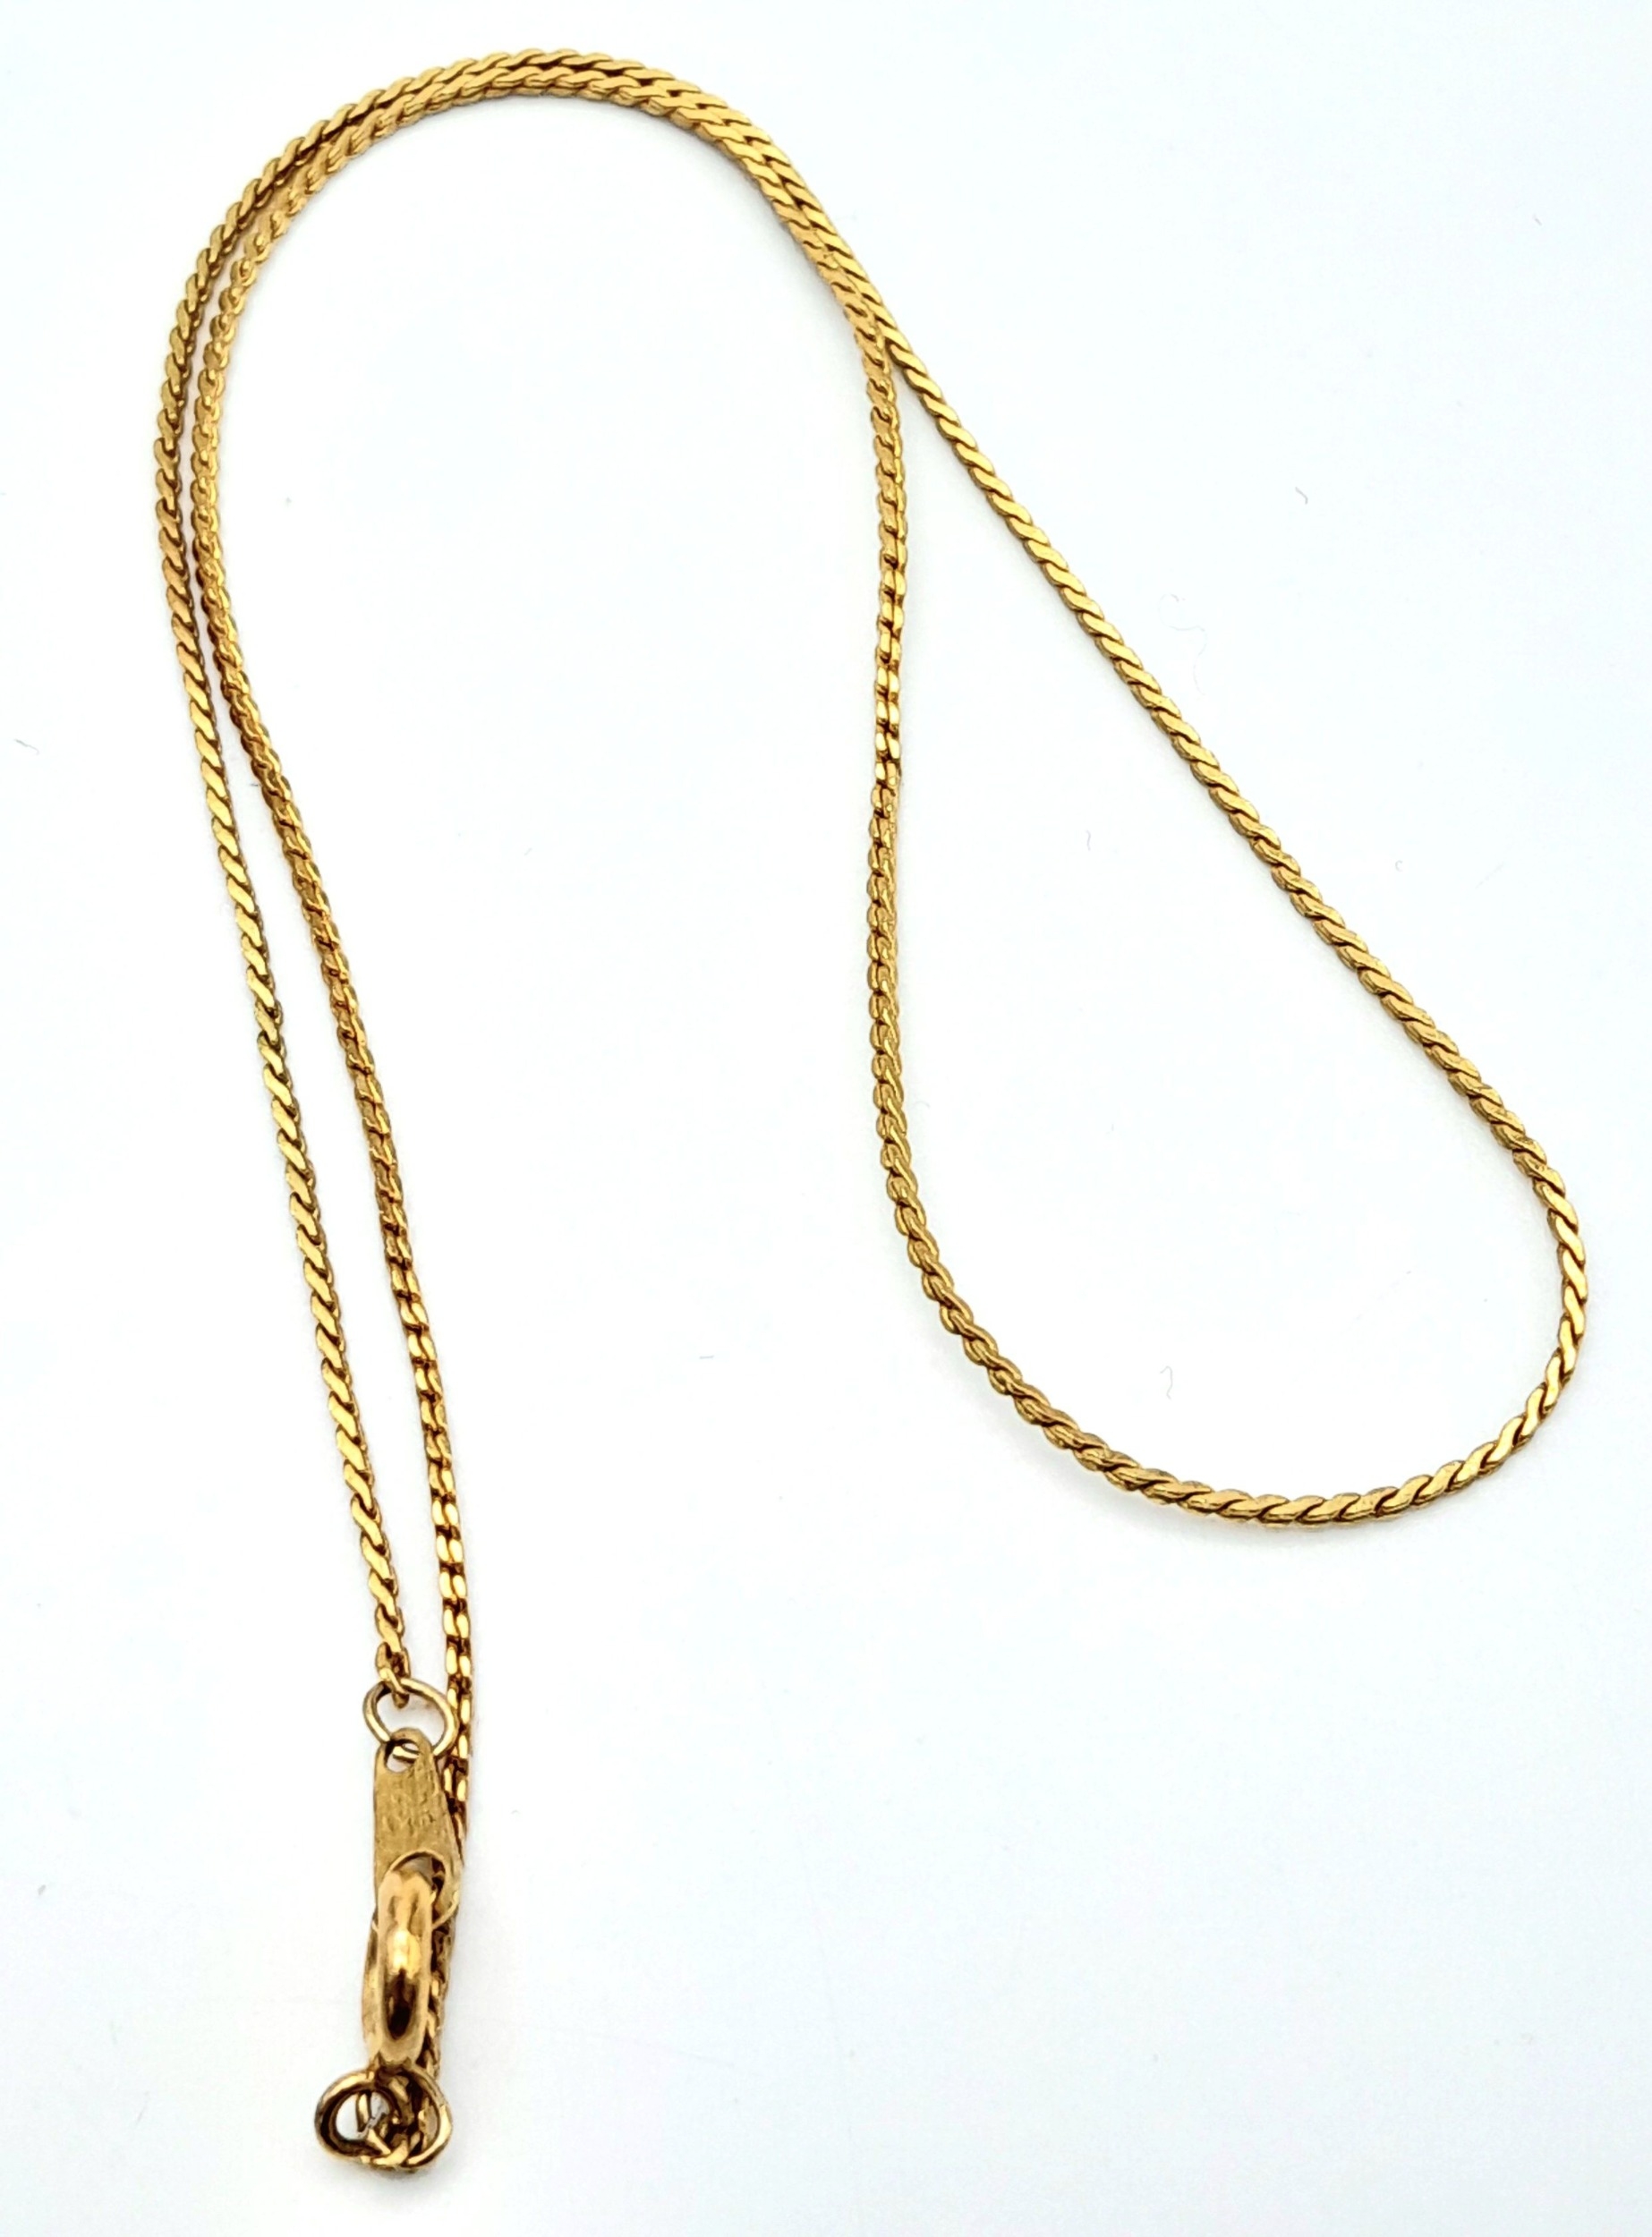 A 9 k yellow gold chain necklace, length: 37 cm, weight: 2.3 g. - Image 2 of 4